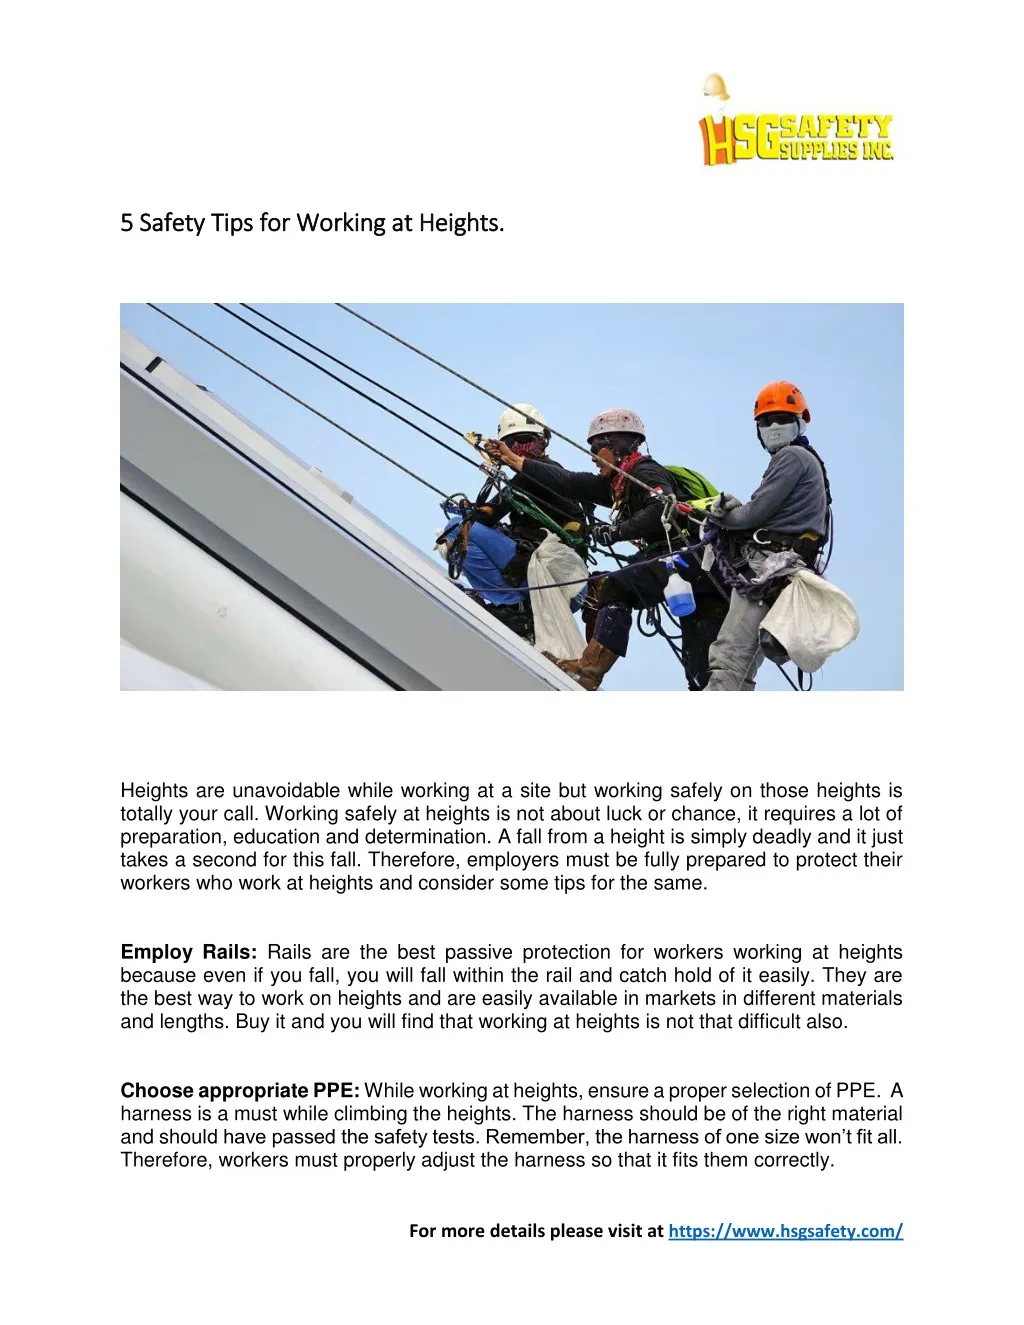 5 5 s safety afety t tips for